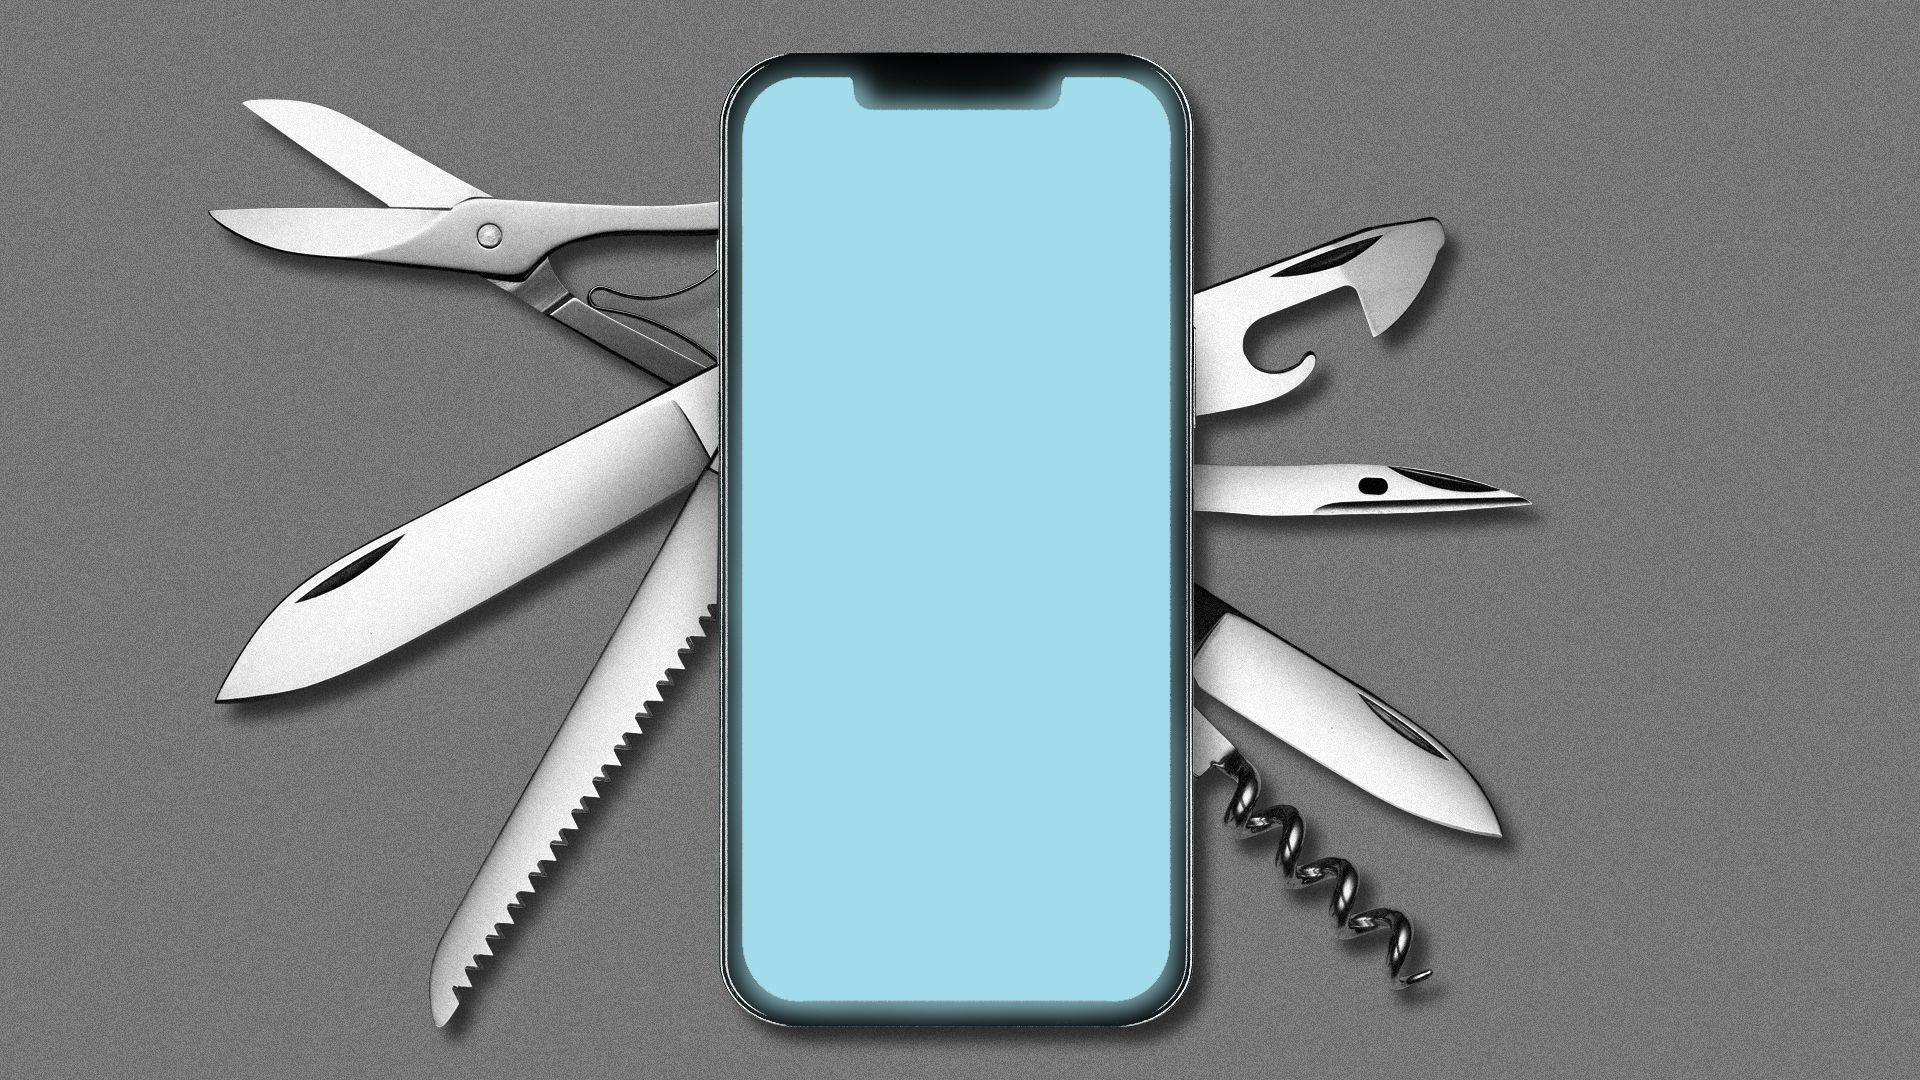 Illustration of a cell phone with Swiss army knife attachments.